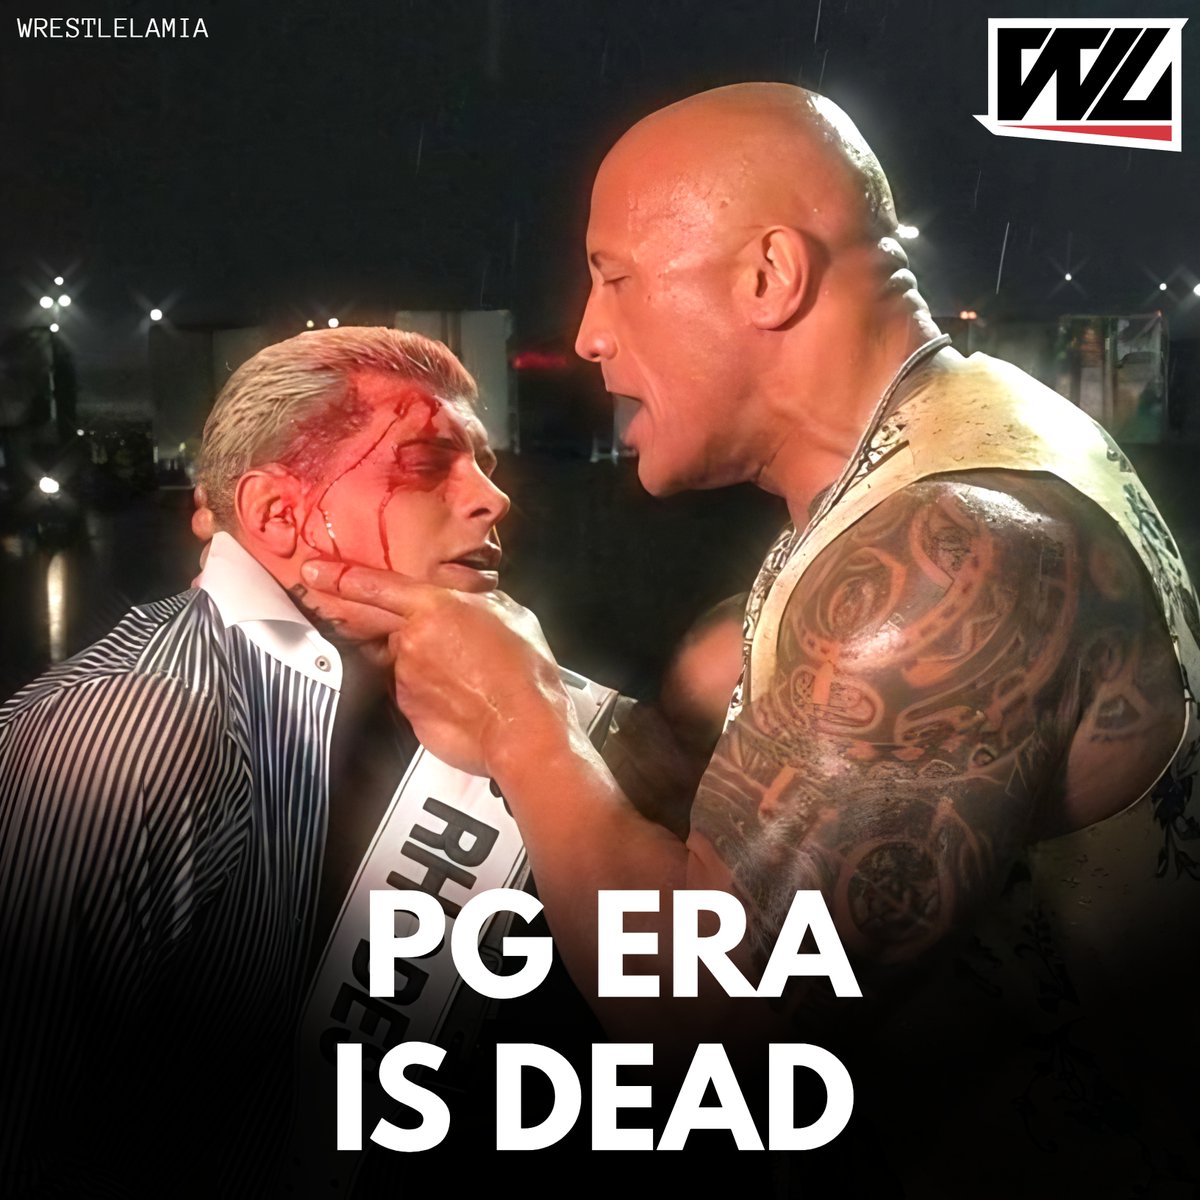 The PG ERA is Dead. 'It was said to us that the Rock interviews and Heyman promo are considered the official end of the PG era.' (WON)